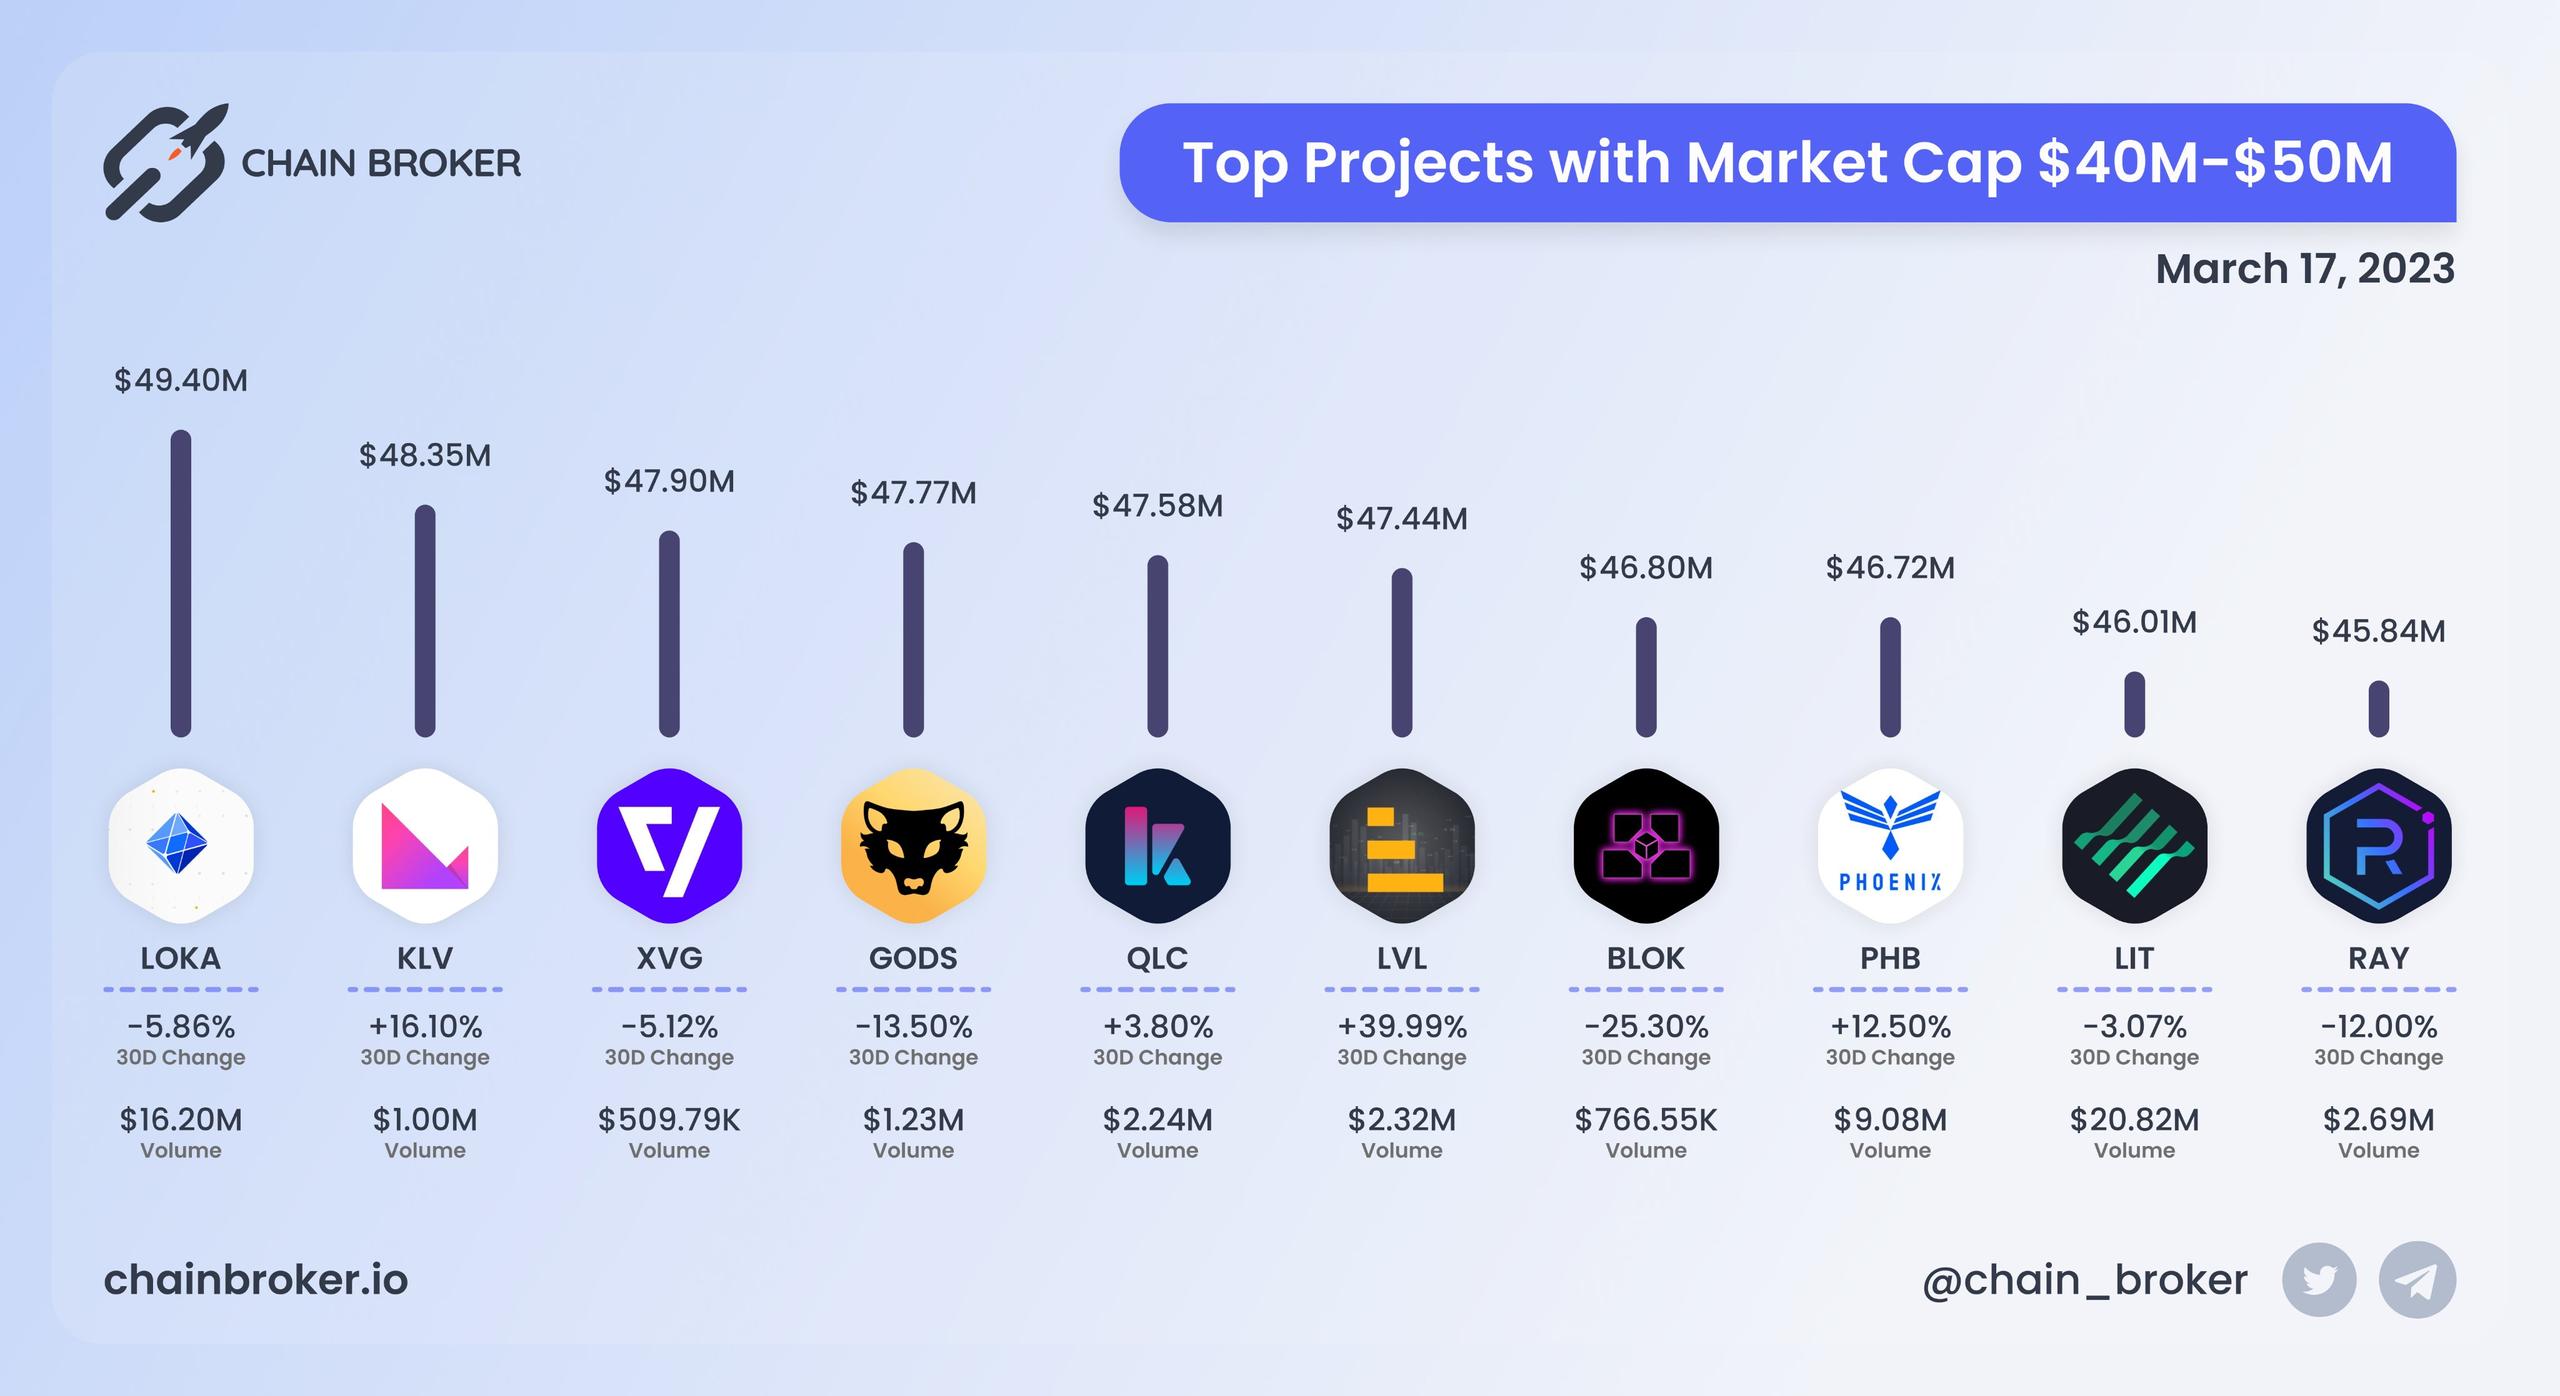 Top projects with Market Cap $40M - $50M